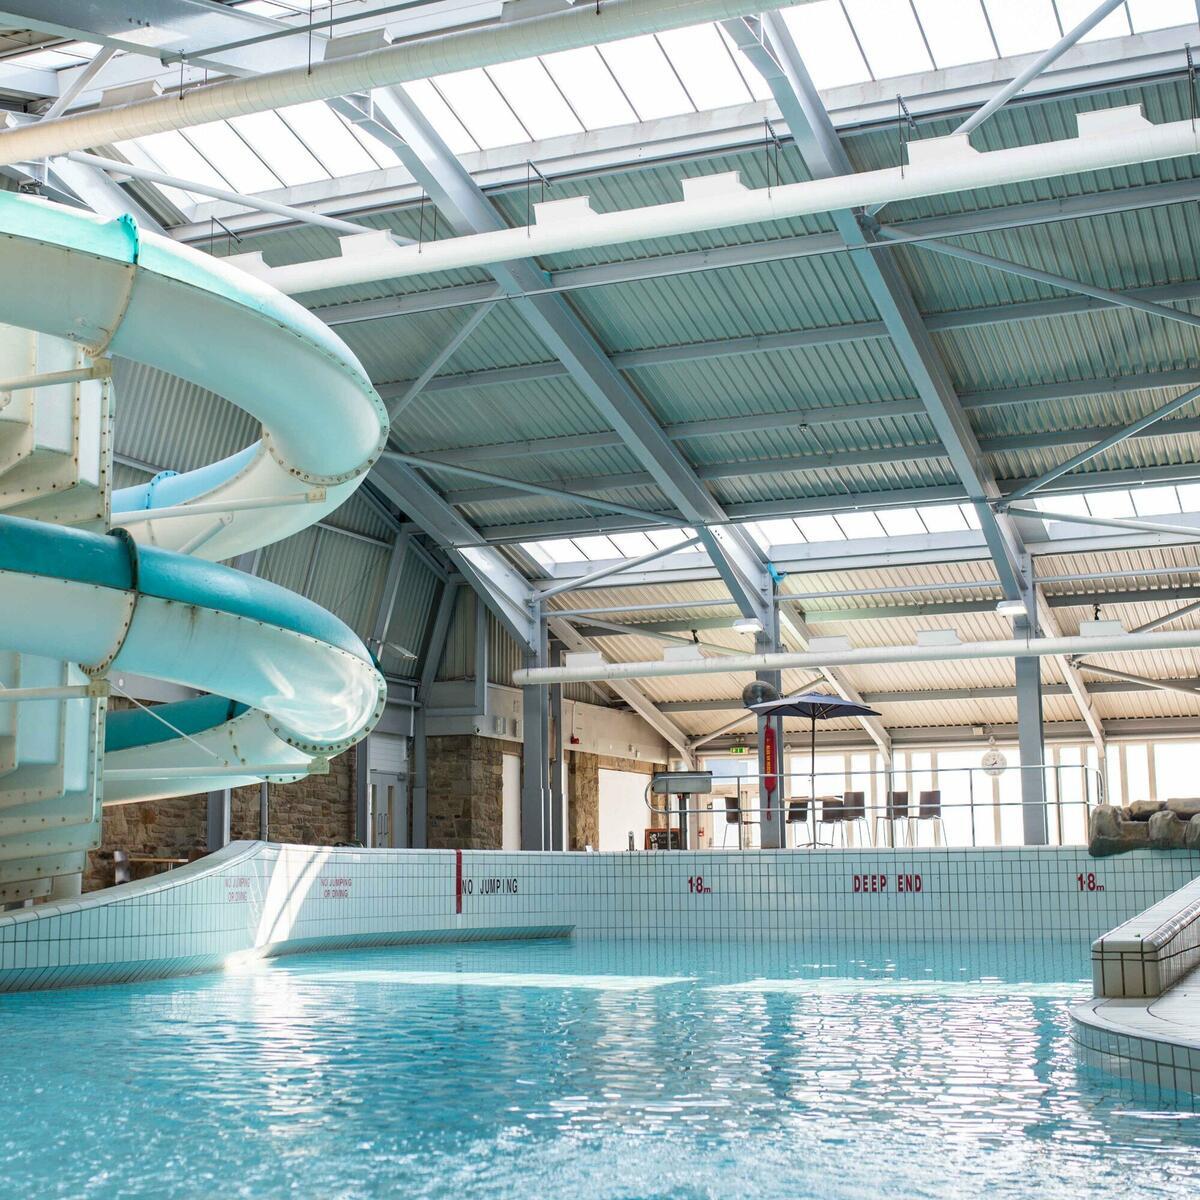 Hereford Leisure Pool Visit Herefordshire